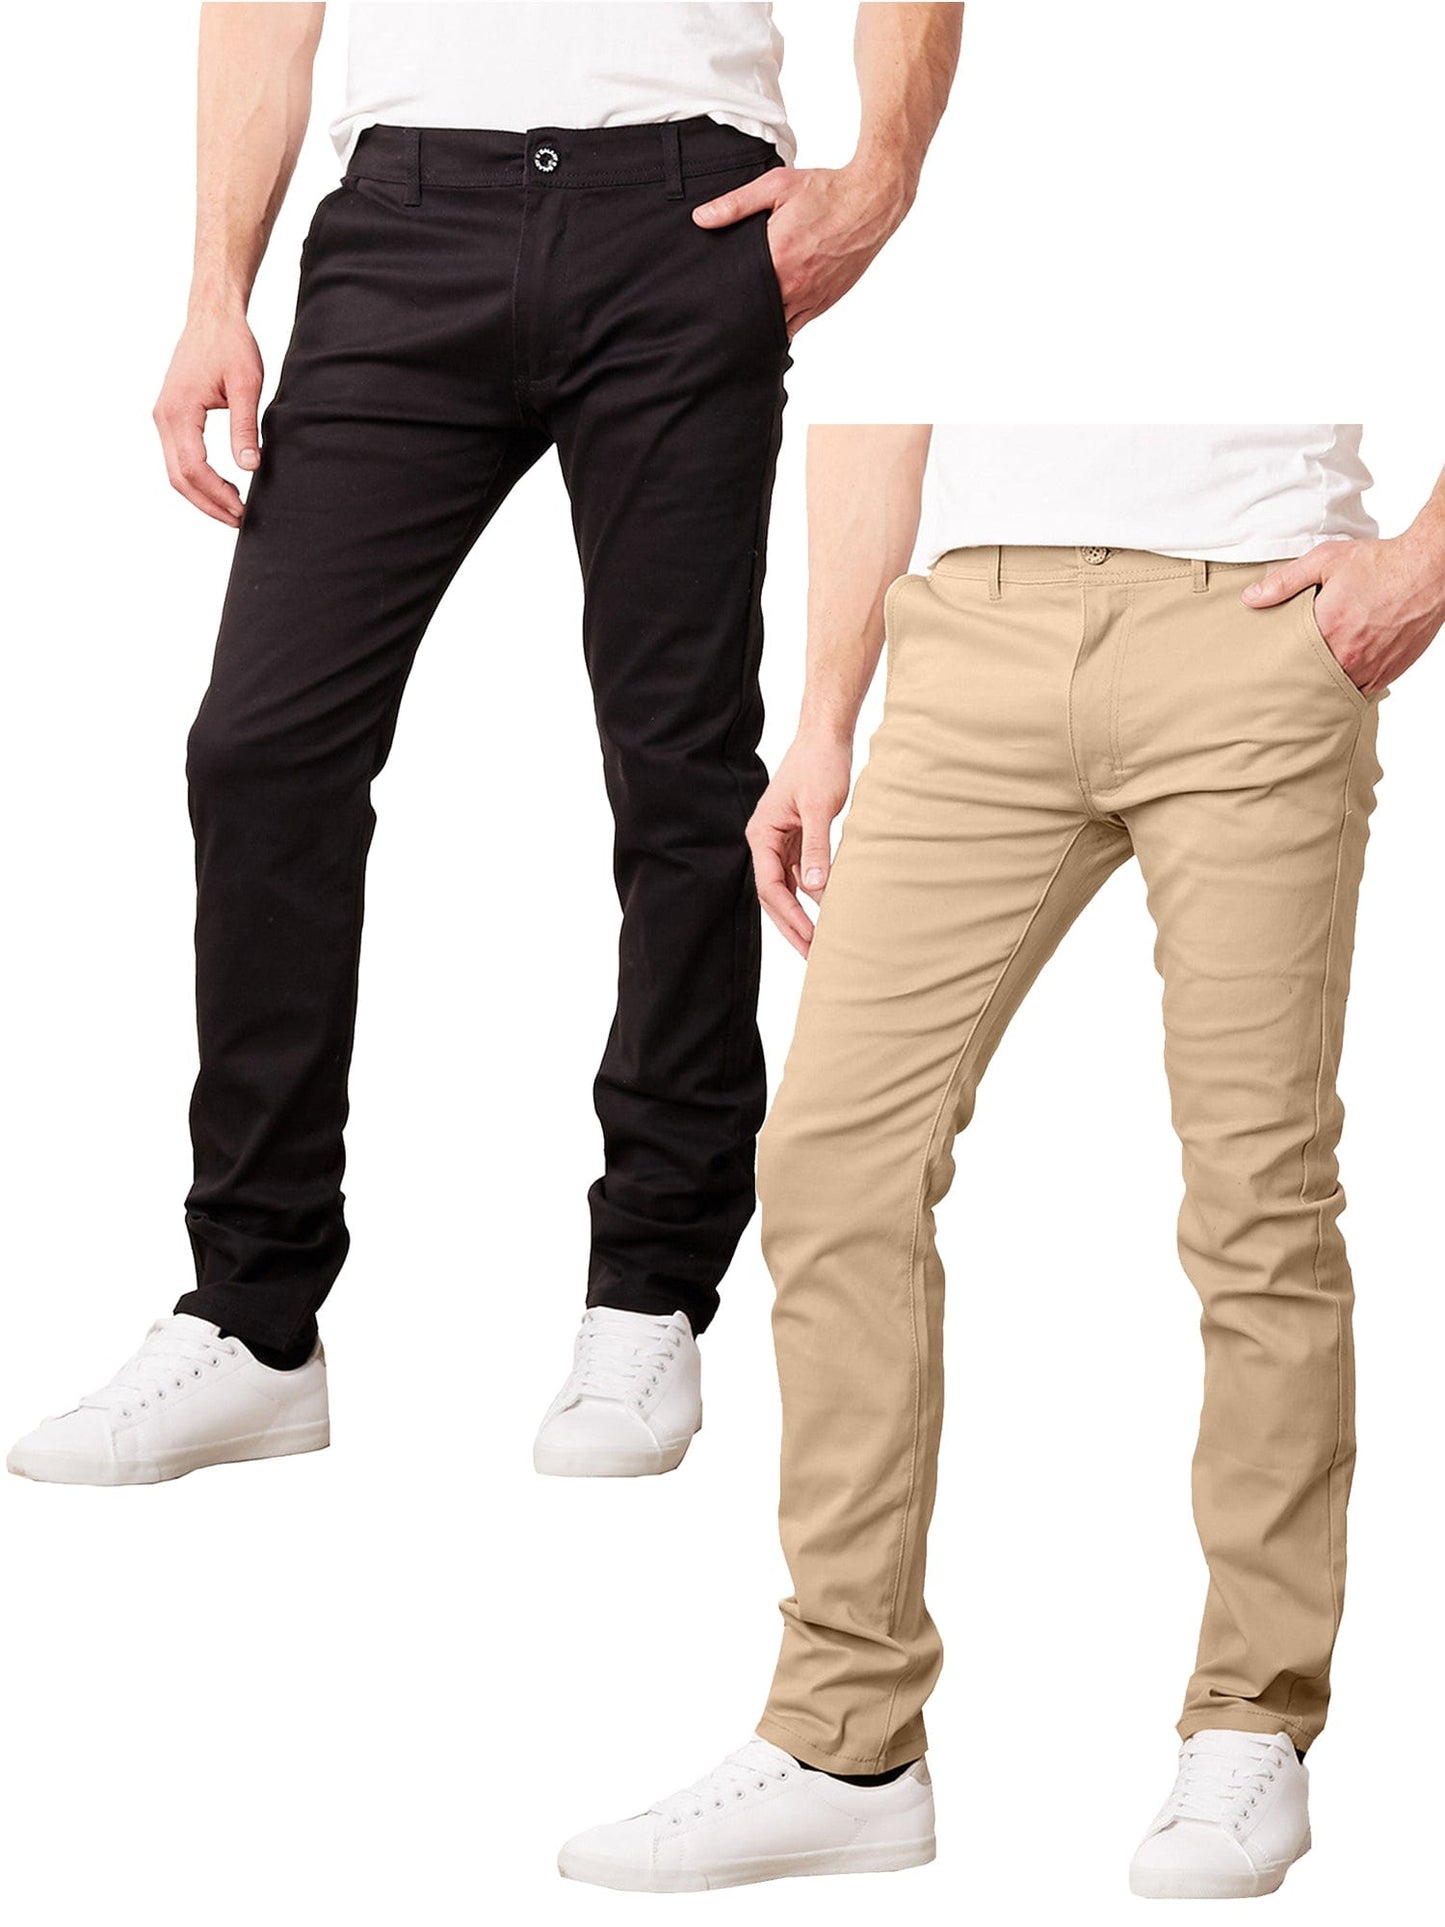 Men's Super Stretch Slim Fit Everyday Chino Pants (Sizes, 30-42) 2-PACK